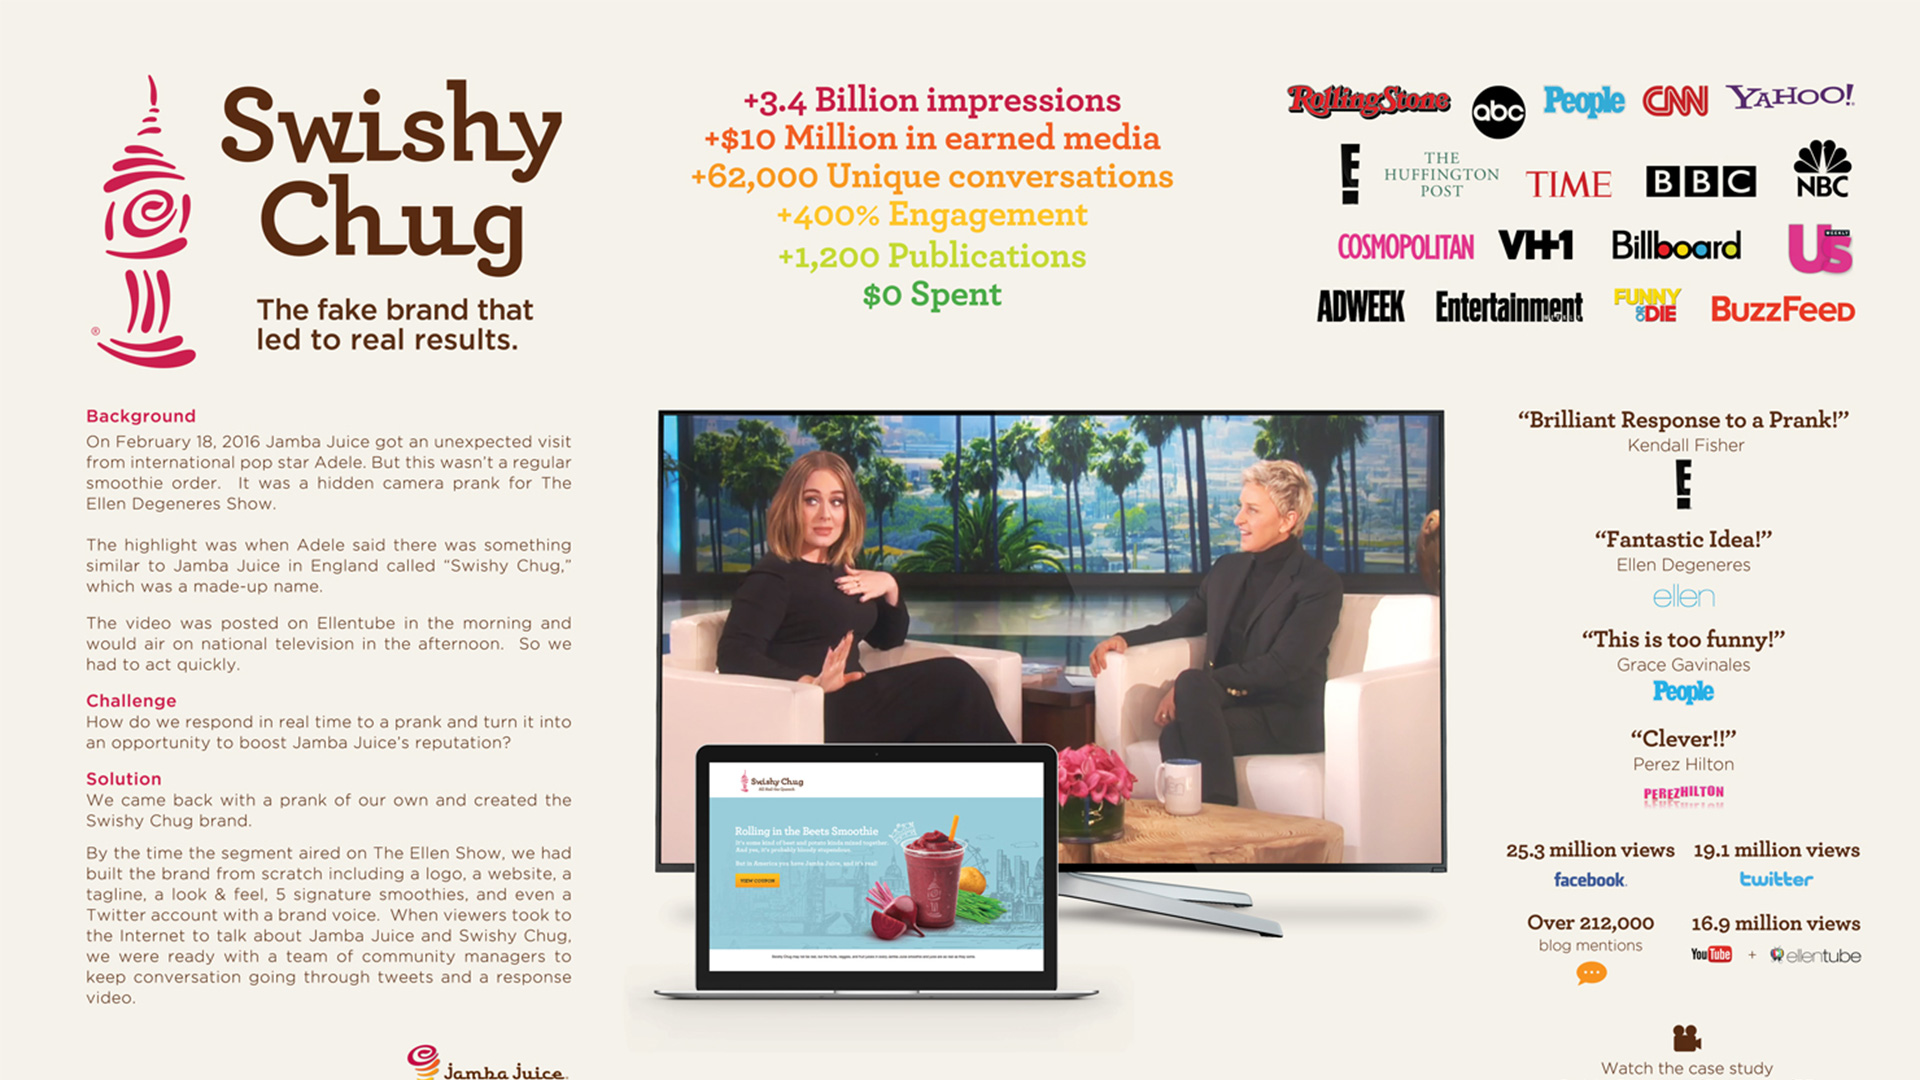 Swishy Chug: The Fake Brand That Led to Real Results